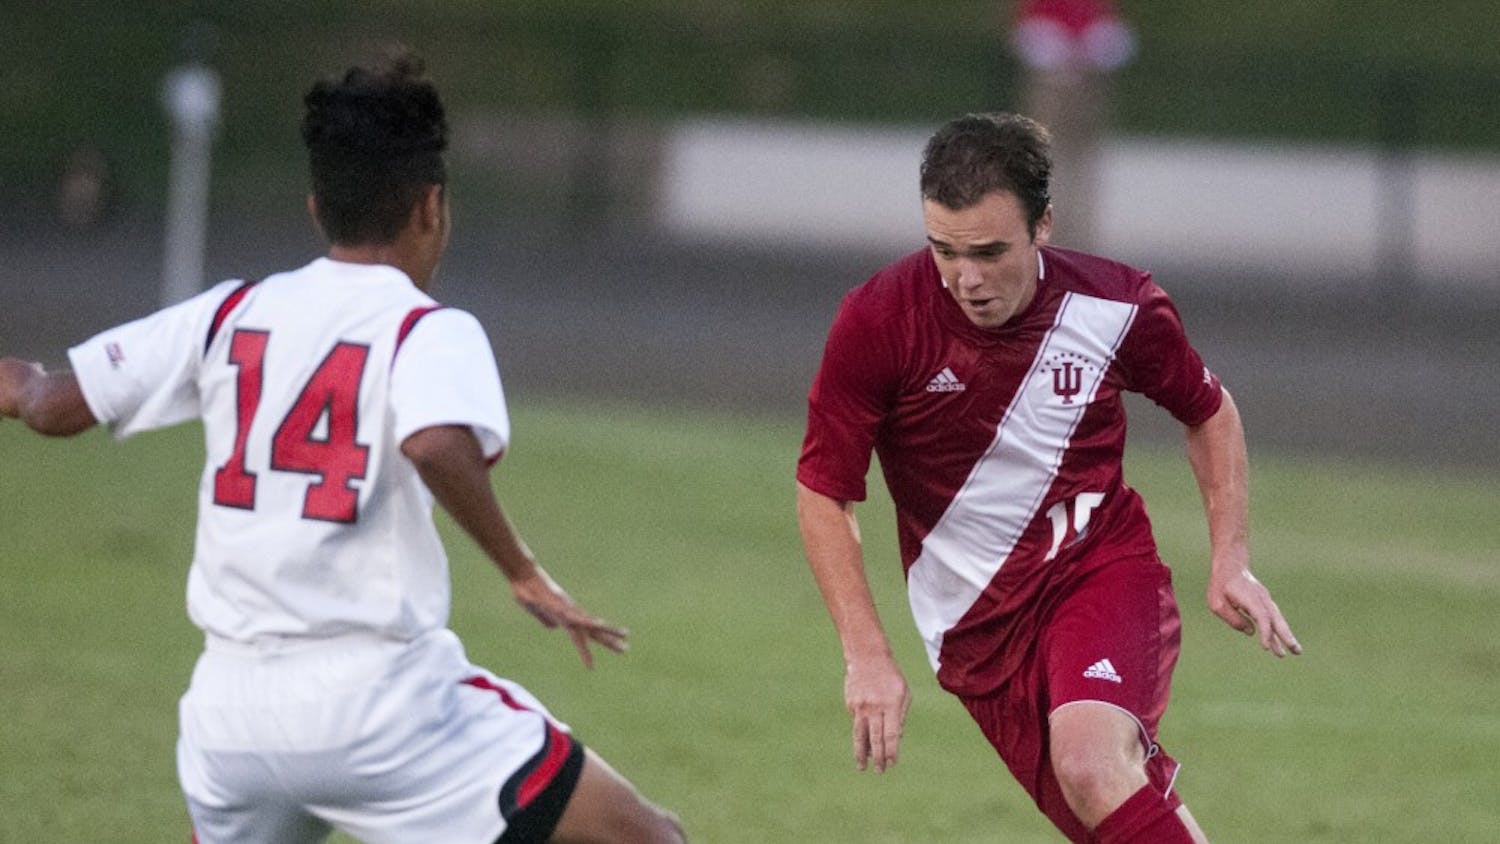 Freshman defender Andrew Gutman dribbles the ball during IU's 2-1 win against St. John's on Friday at Bill Armstrong Stadium.